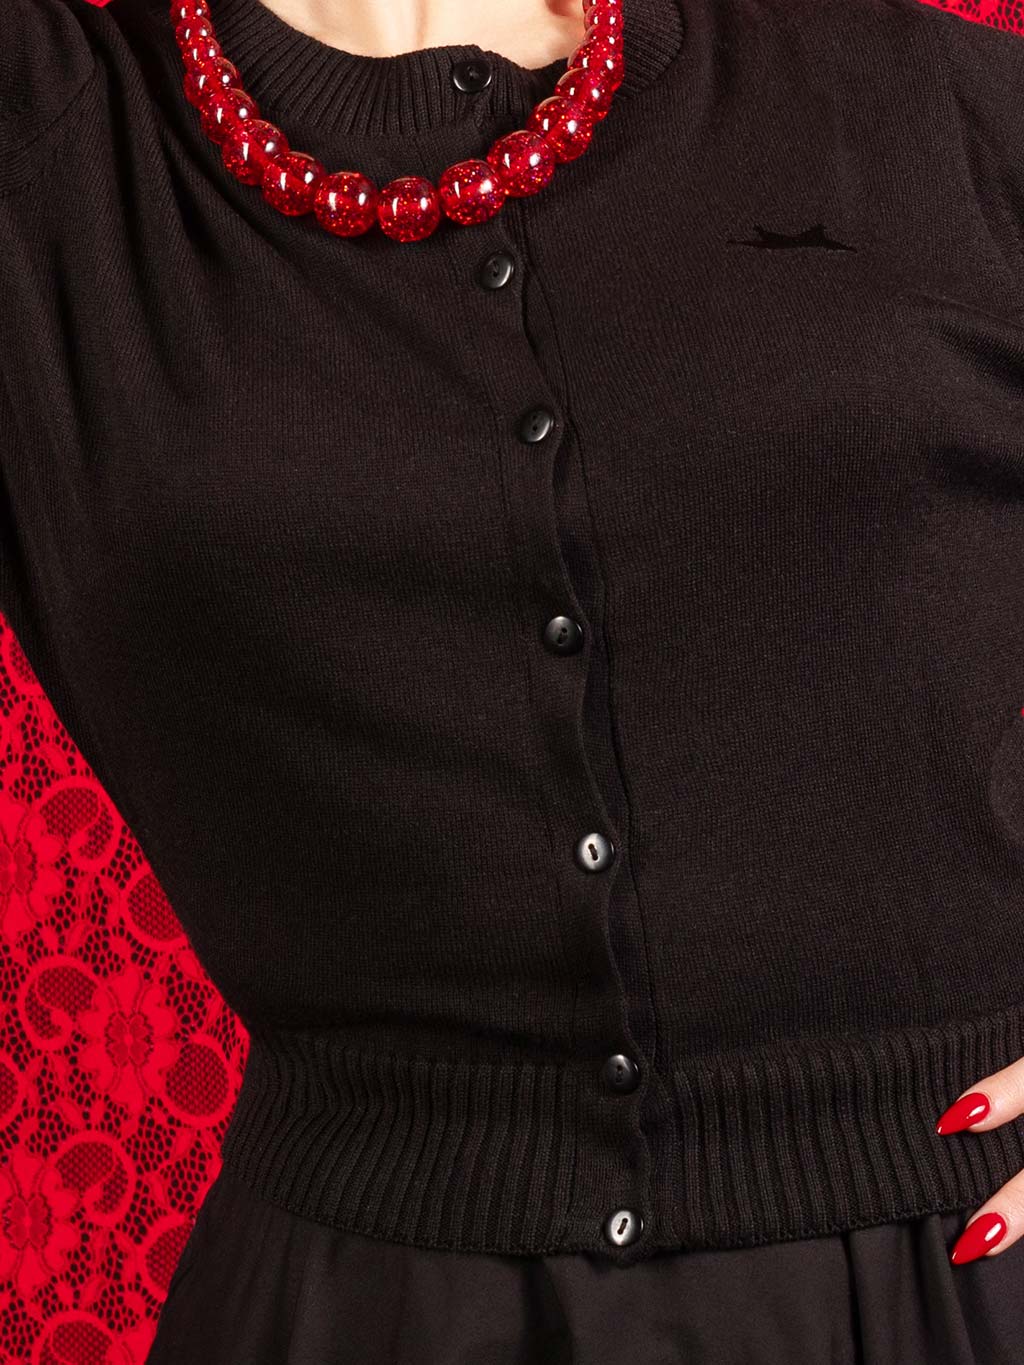 close up of a vintage inspired black cardigan by what katie did showing the buttons and crown logo